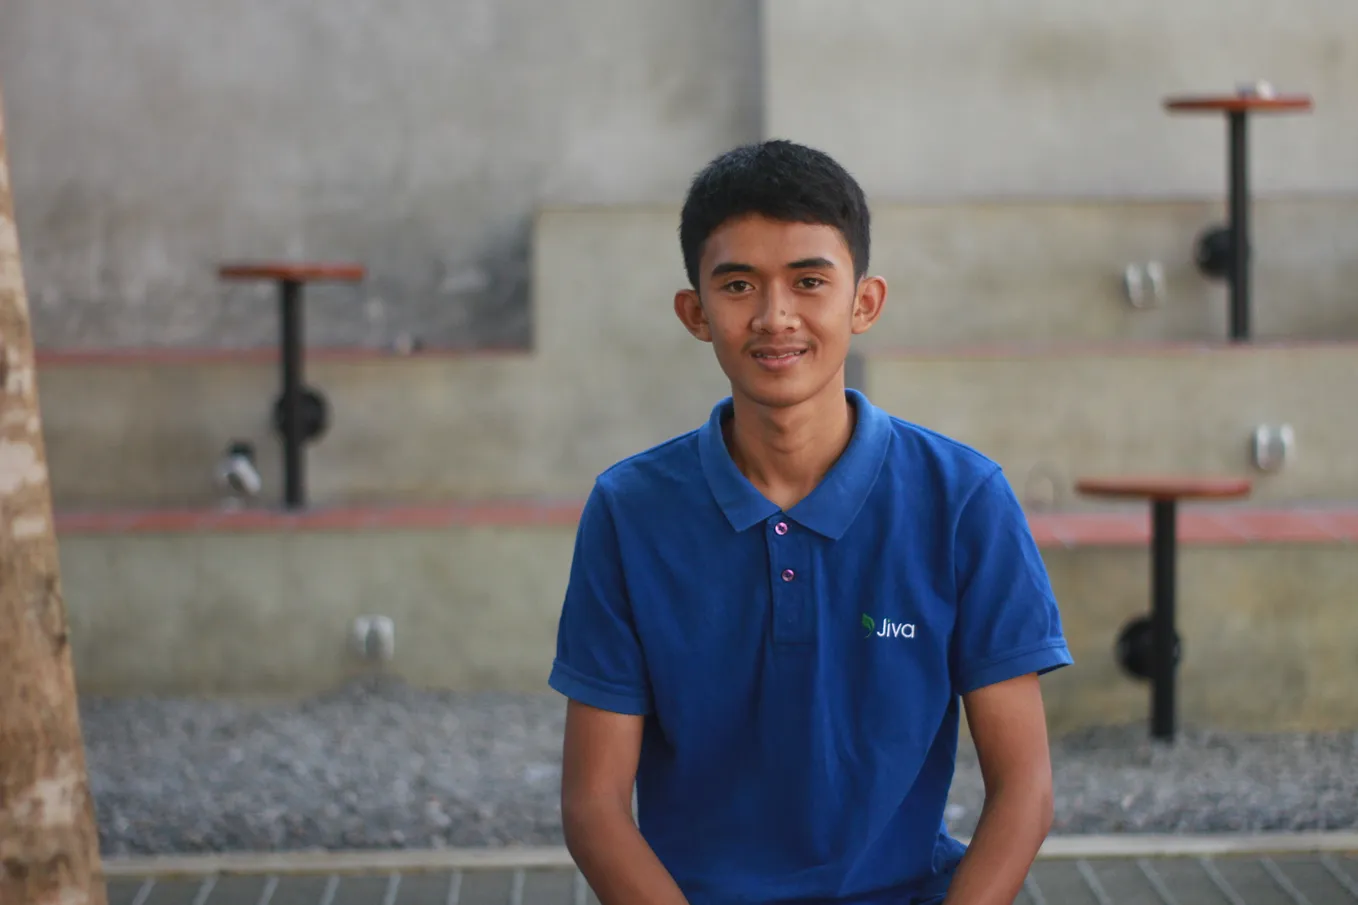 Meet Alfian, our 21-year-old Sahabat Jiva who changed his family’s lives